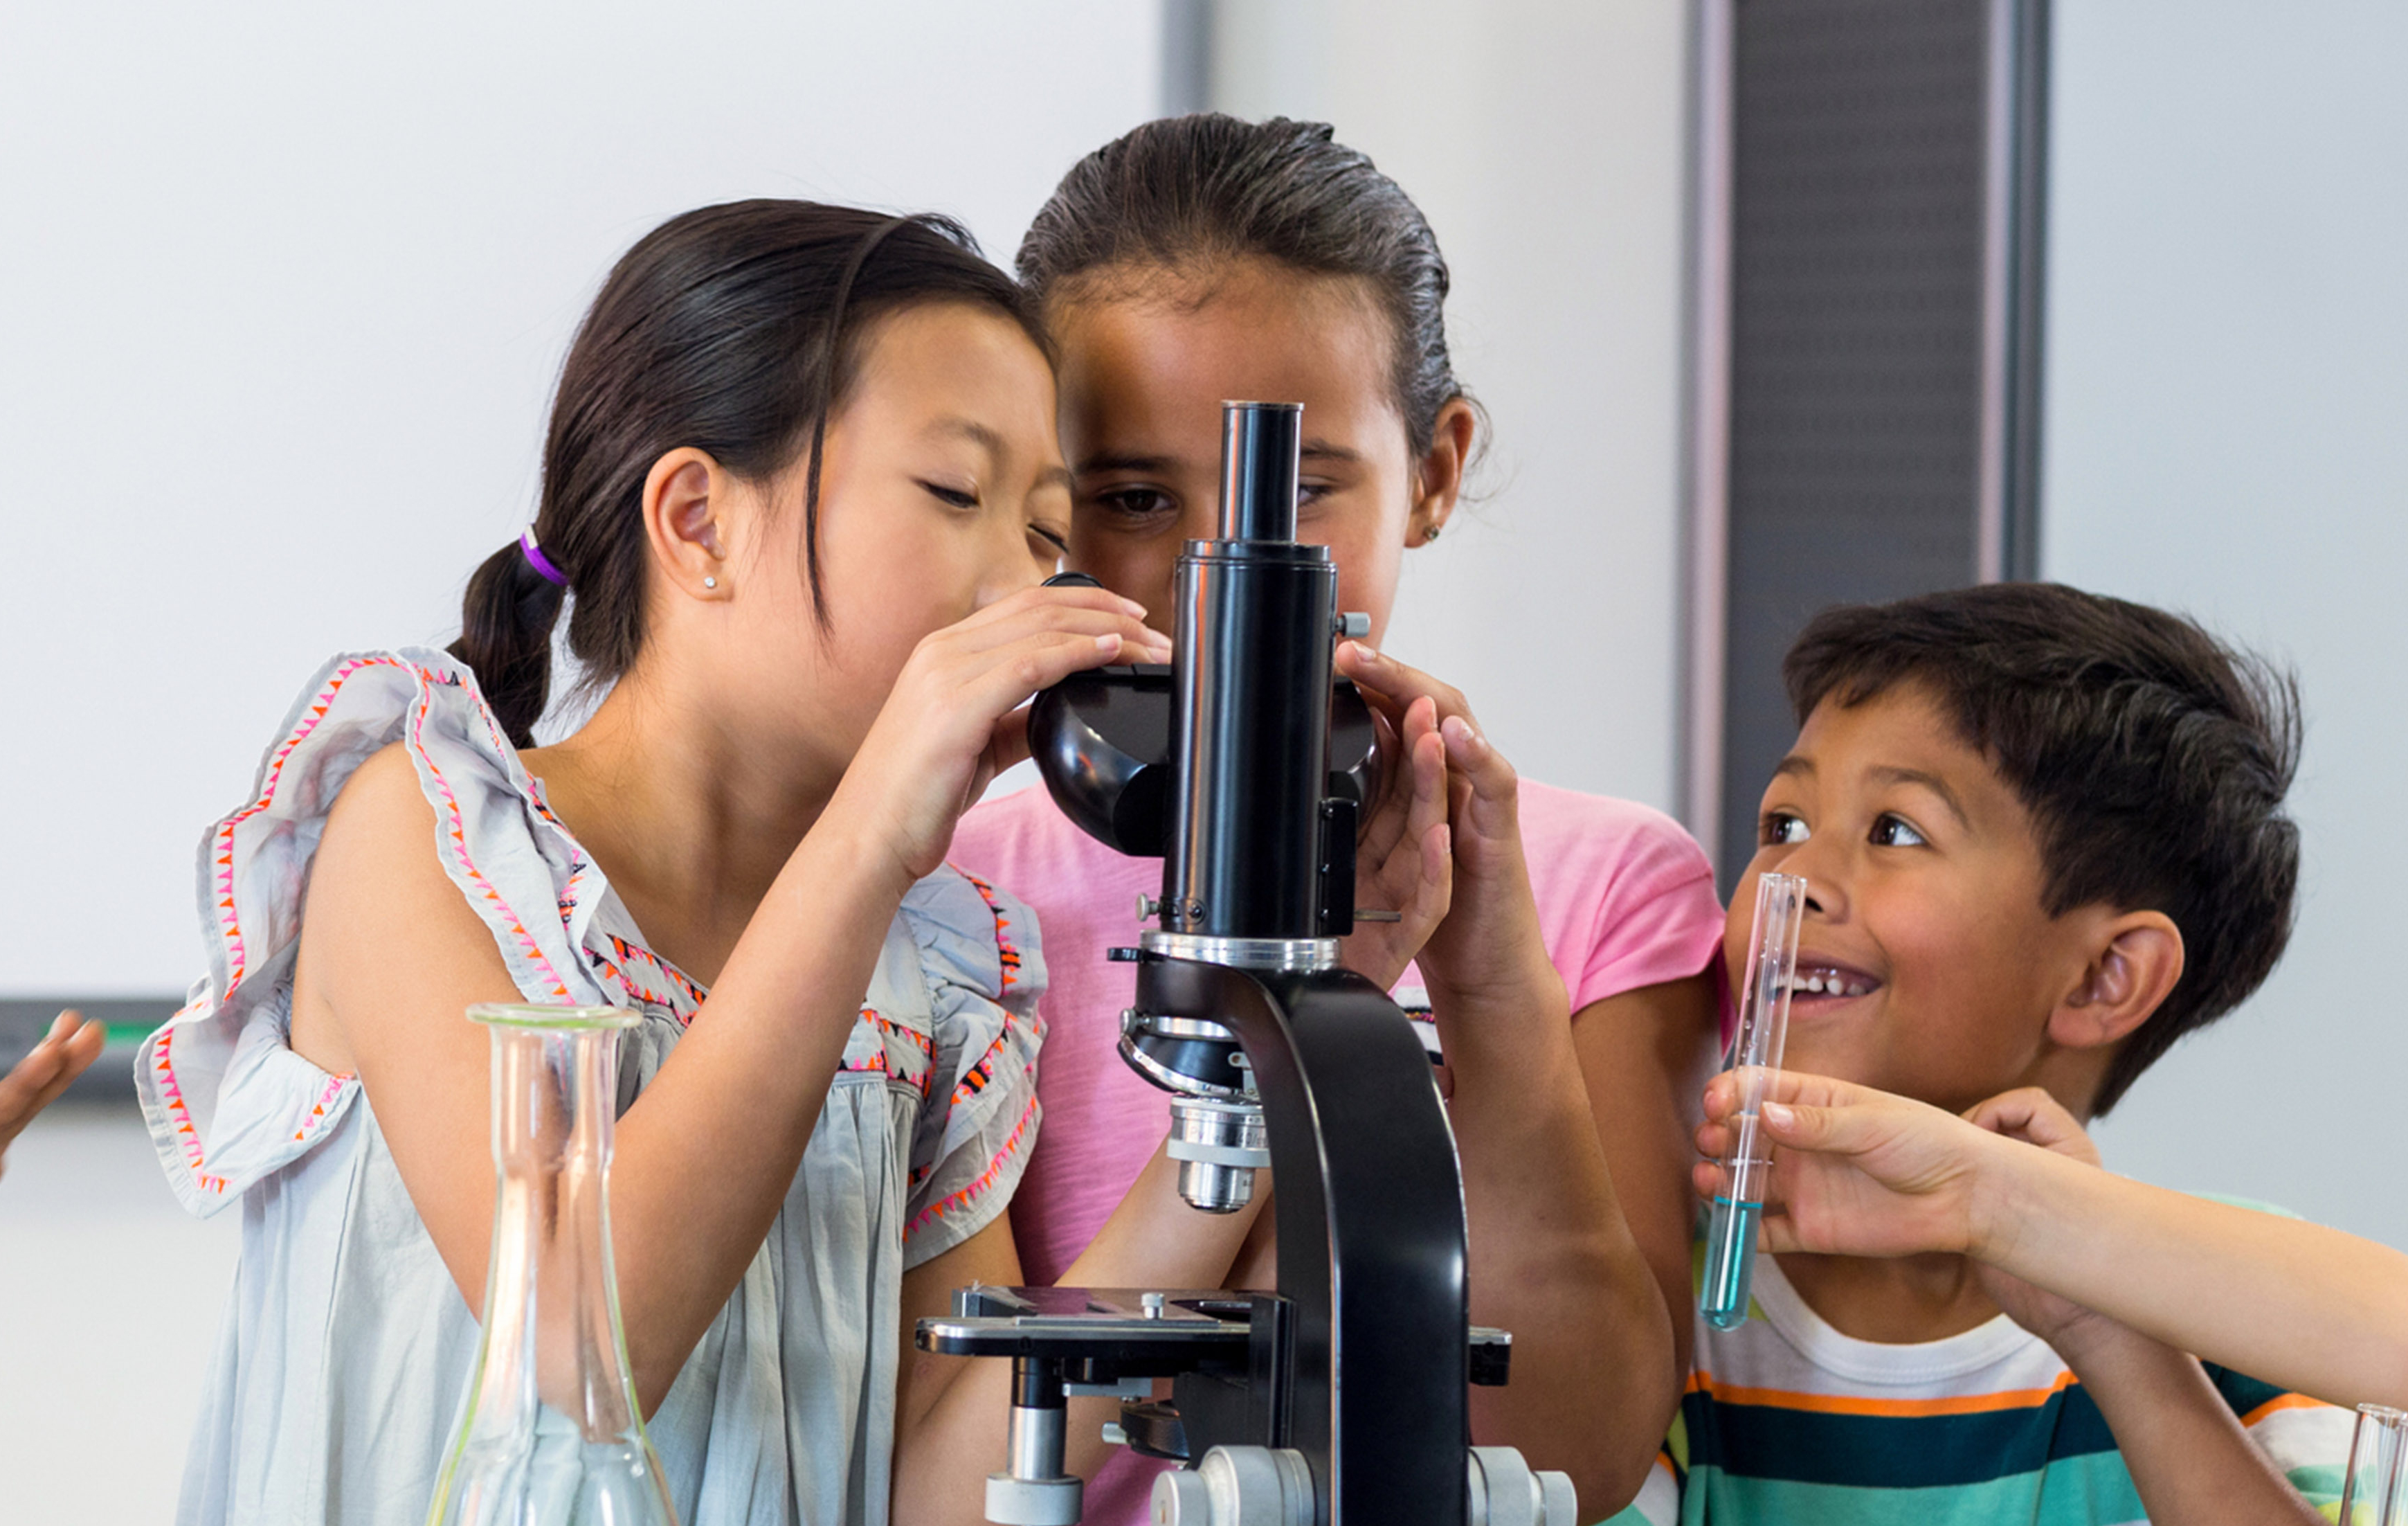 Children Looking through Microscope - Science